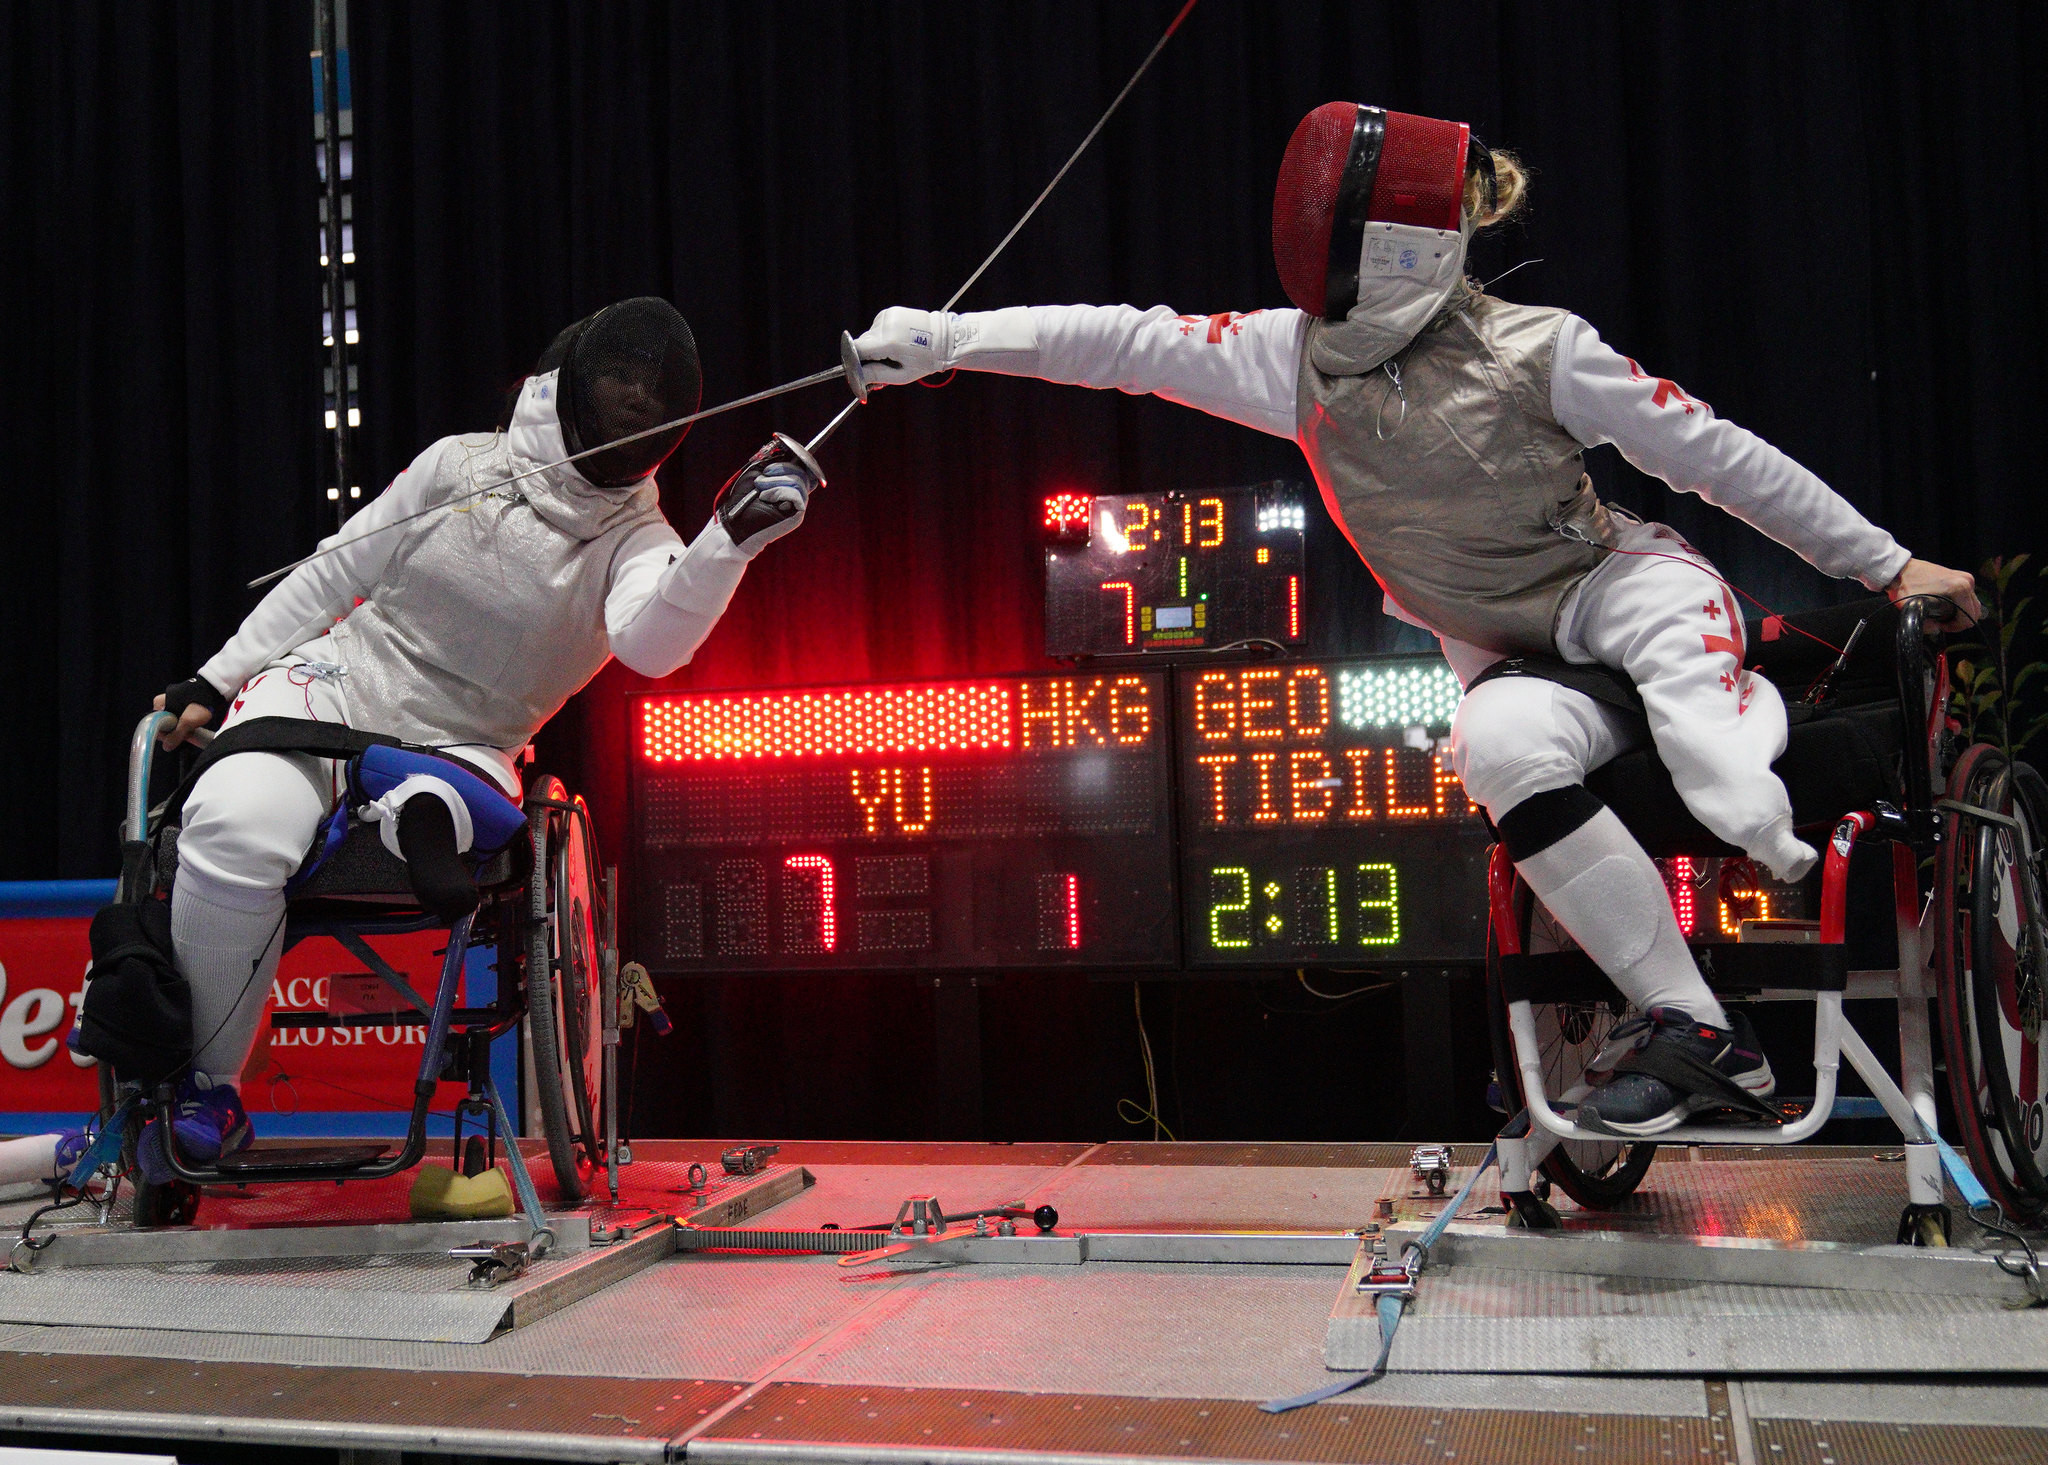 Khetsuriani earns second gold at IWAS Wheelchair Fencing World Cup in Pisa